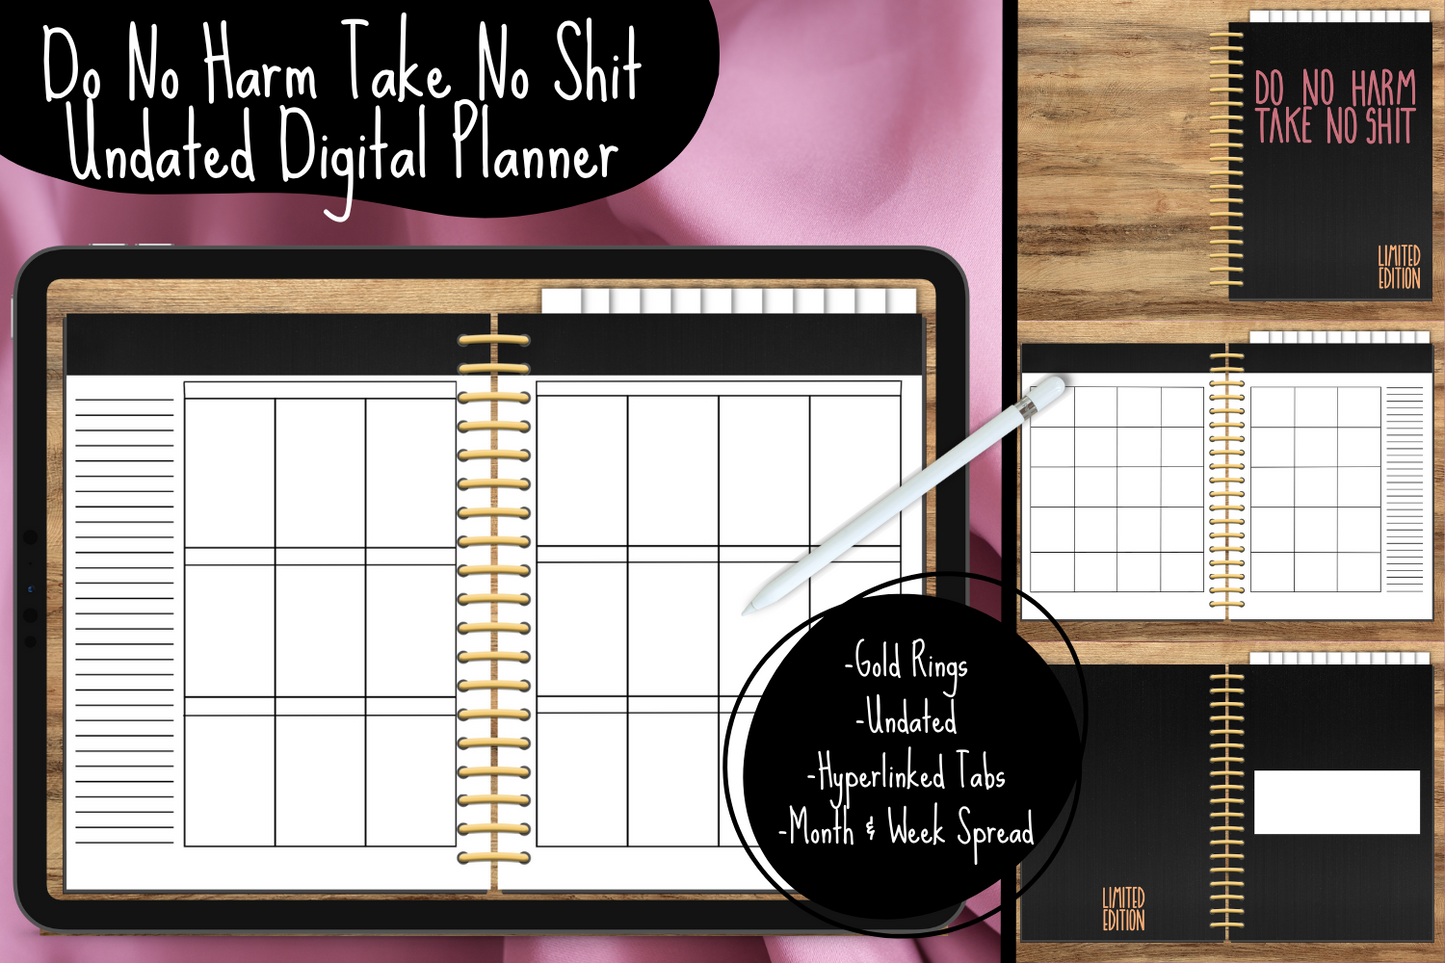 Do No Harm Take No Shit Undated Digital Planner - Gold Rings